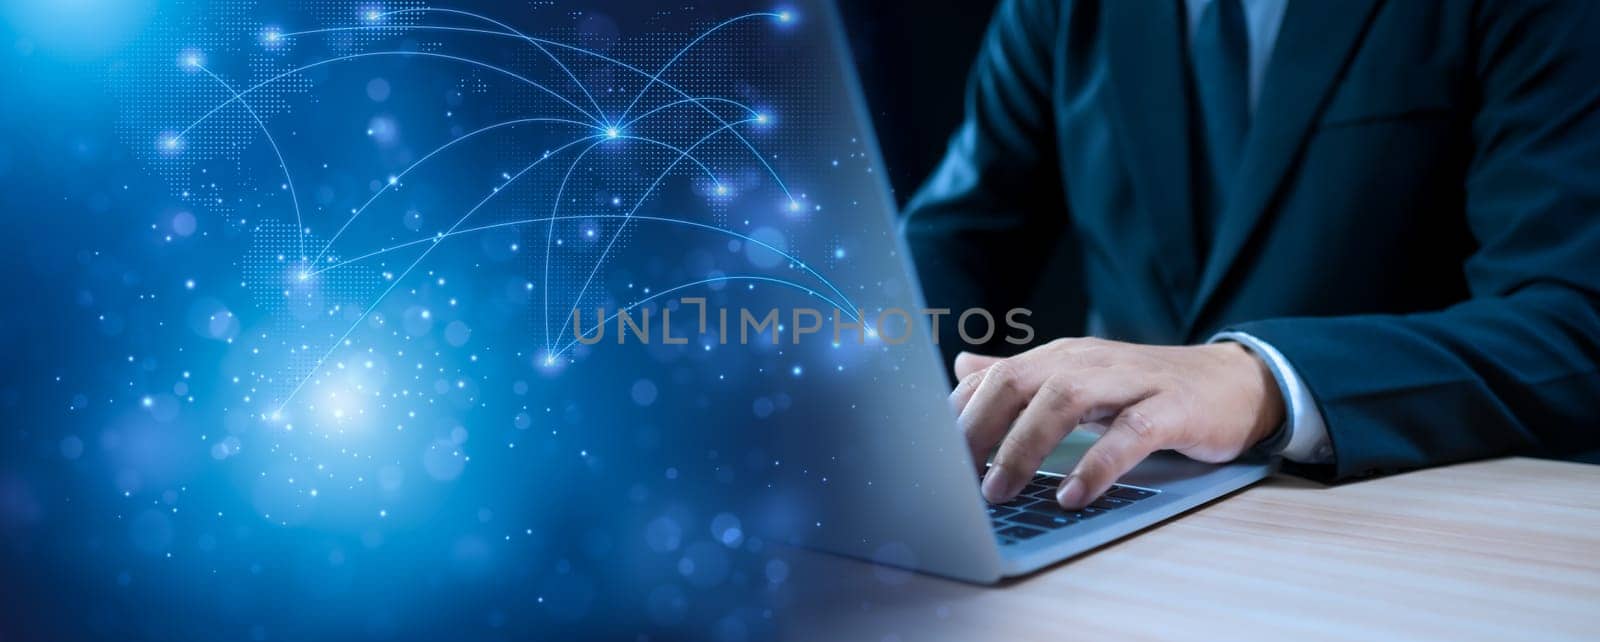 Businessman working on computer connecting business network. Network concept. Global business concept. Information exchange concept. by Unimages2527